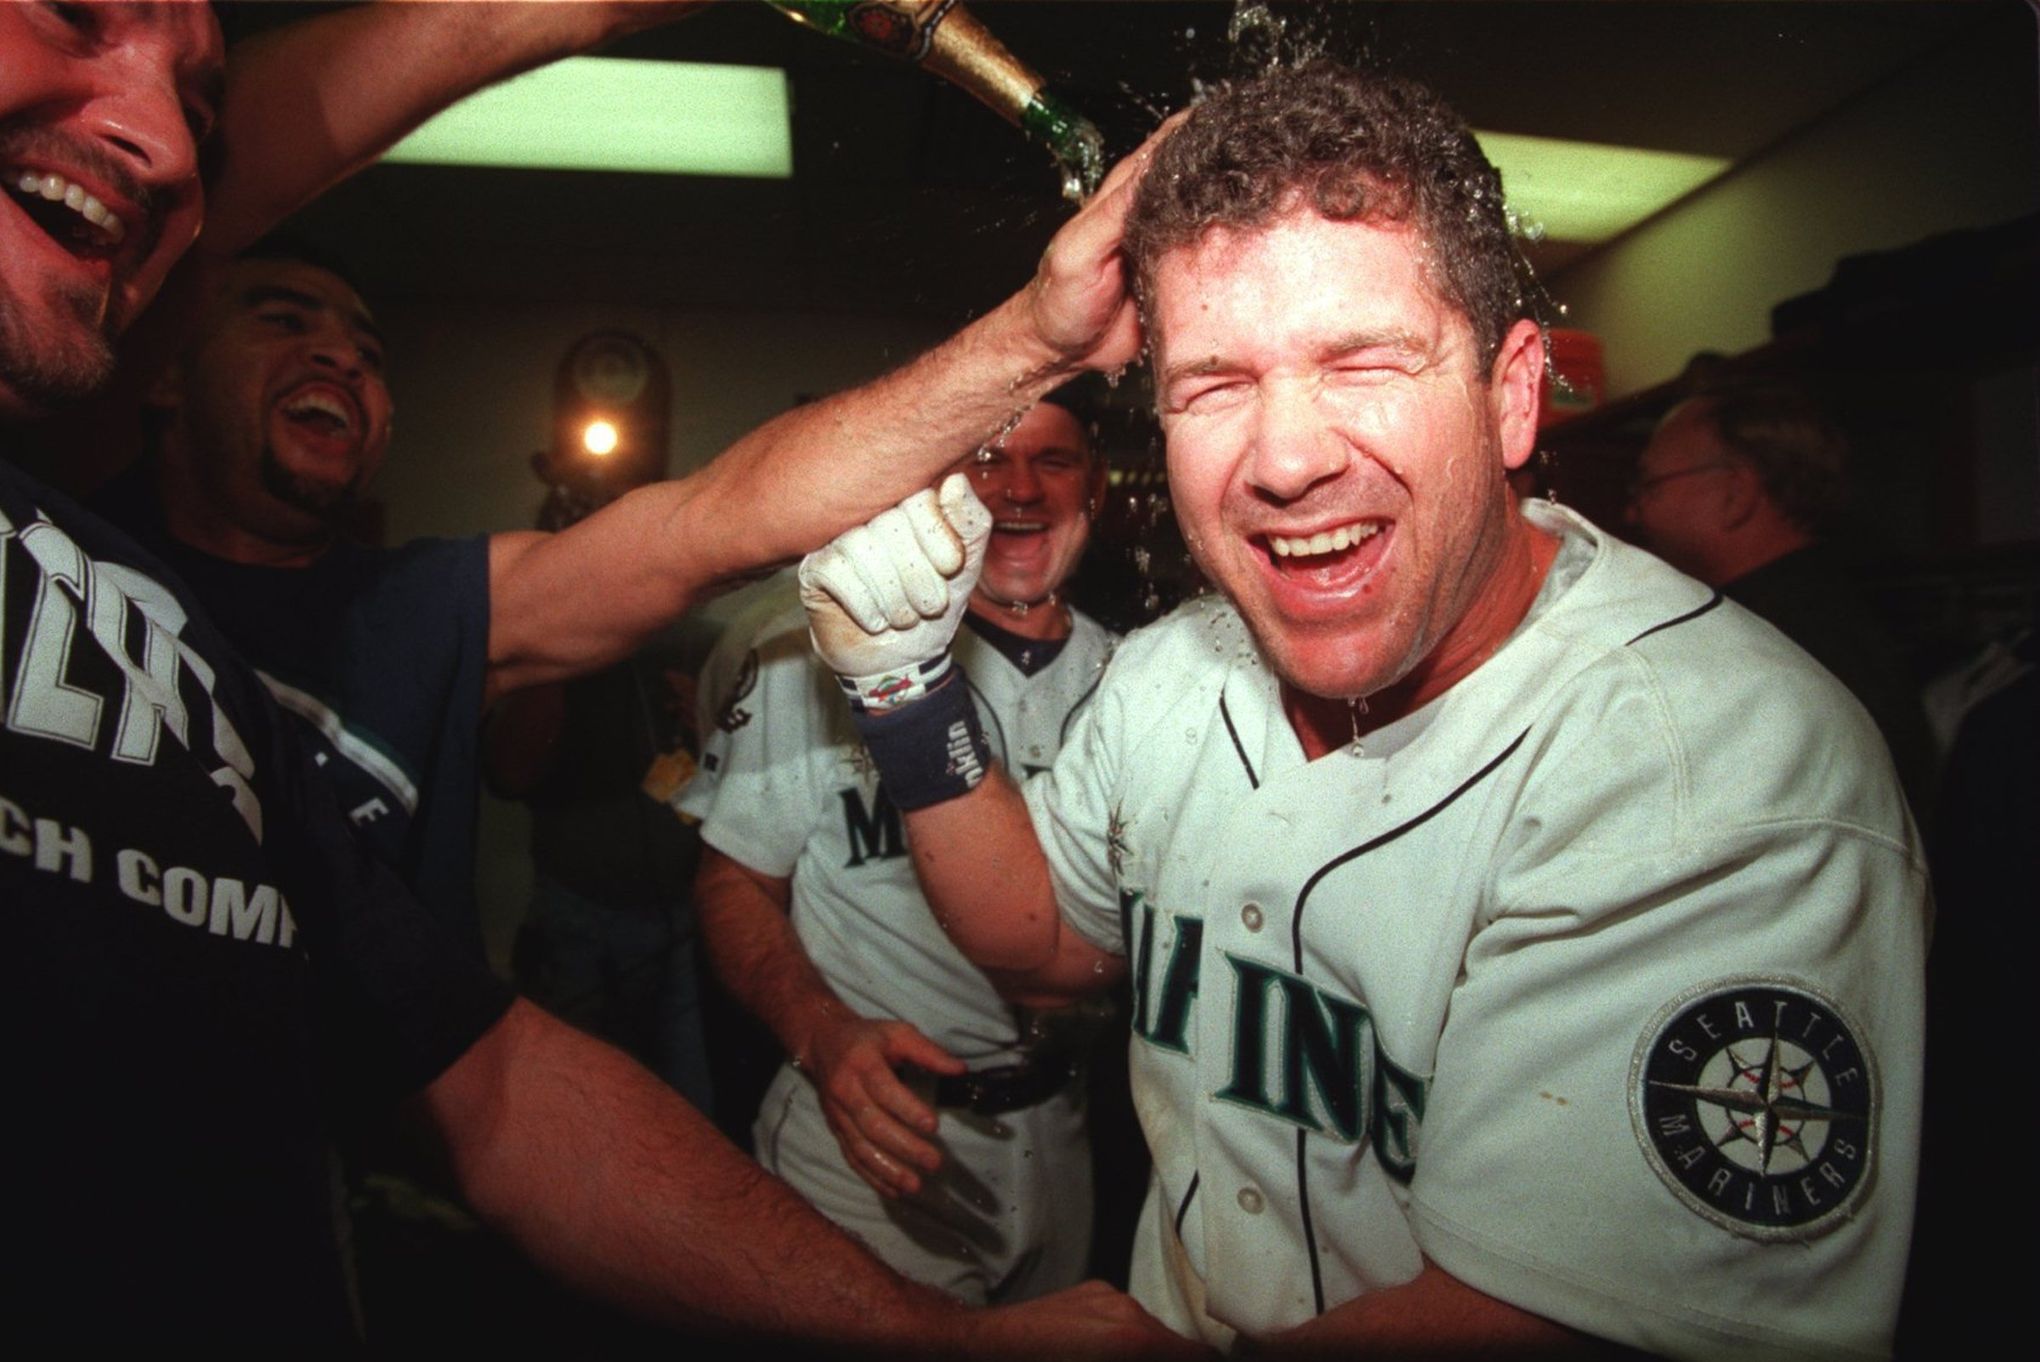 Hall of Fame Candidate Edgar Martinez: By The Numbers